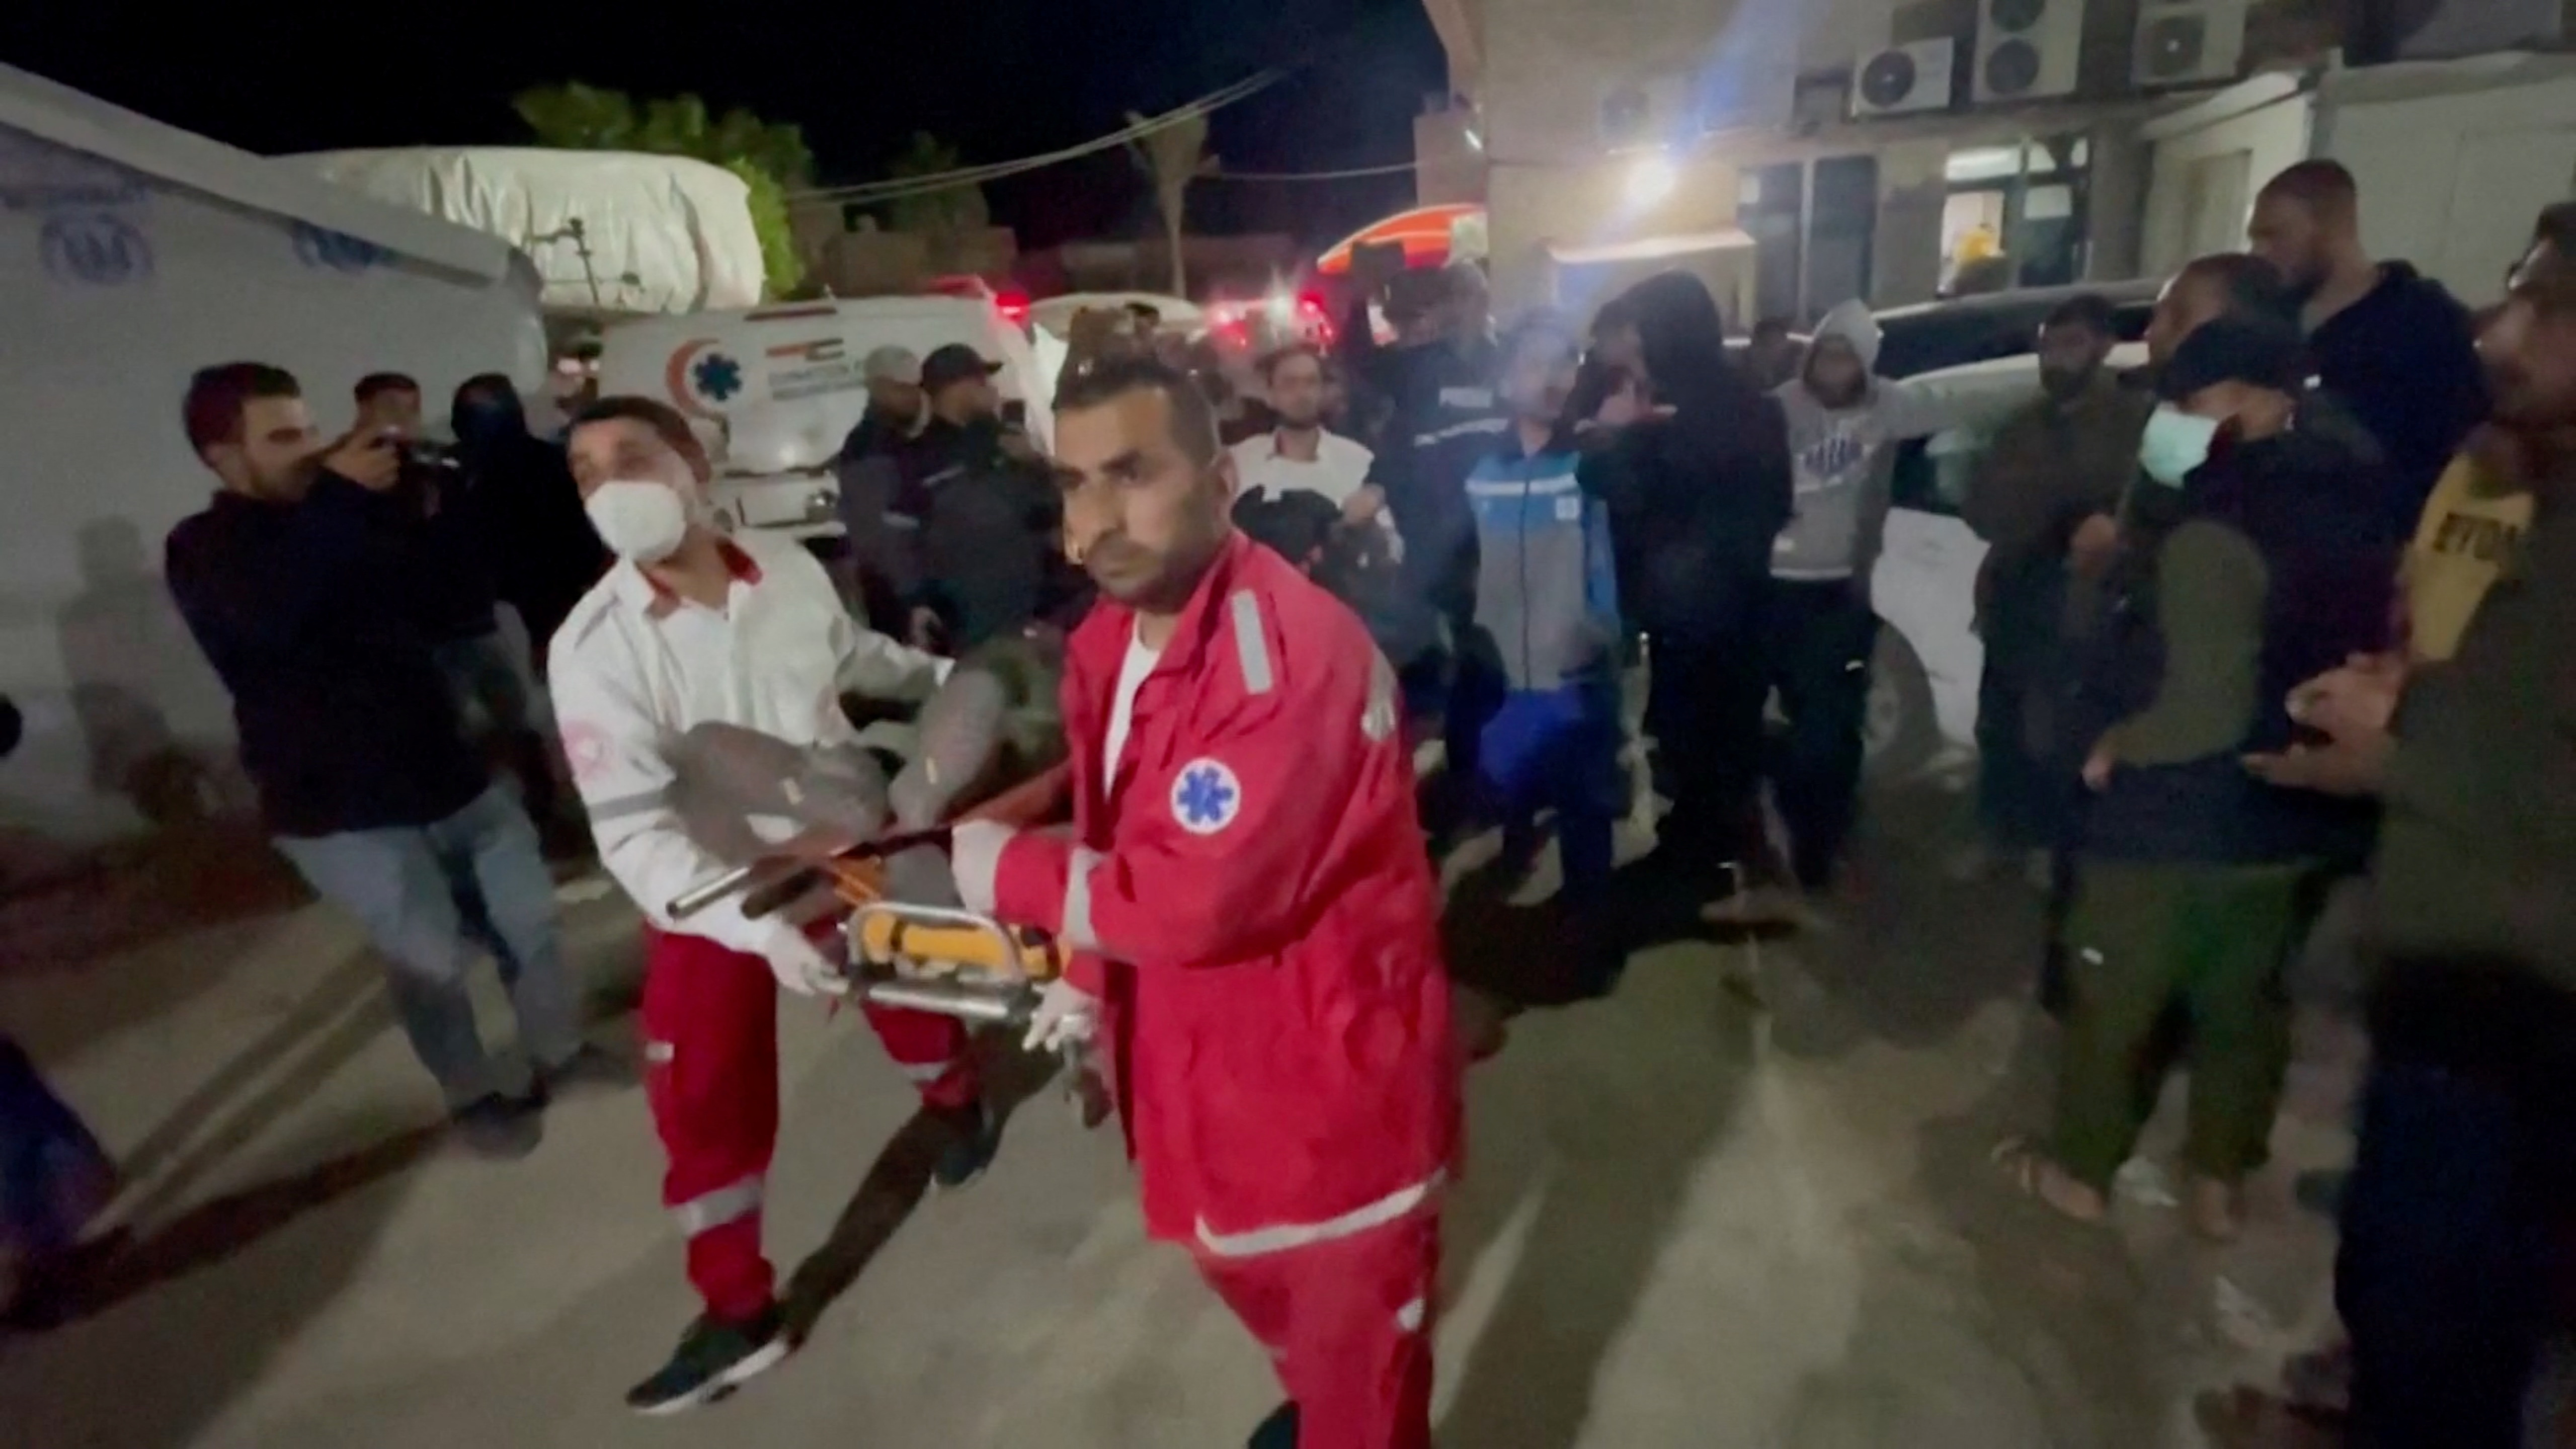 The body of a World Central Kitchen (WCK) worker is transported on a stretcher by paramedics in Deir al-Balah